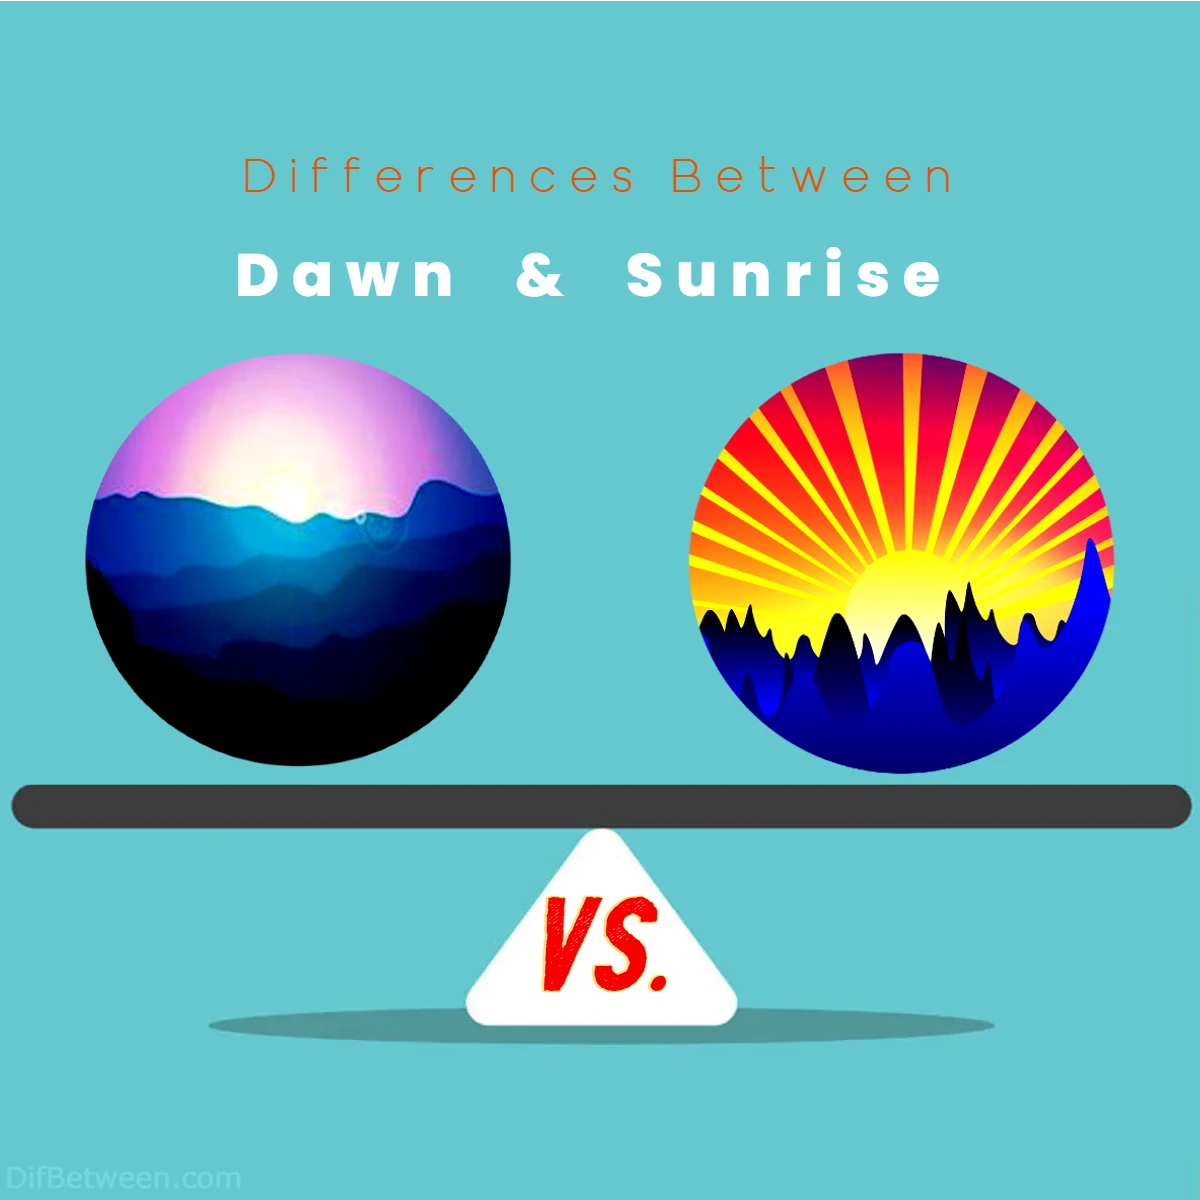 Differences Between Dawn vs Sunrise